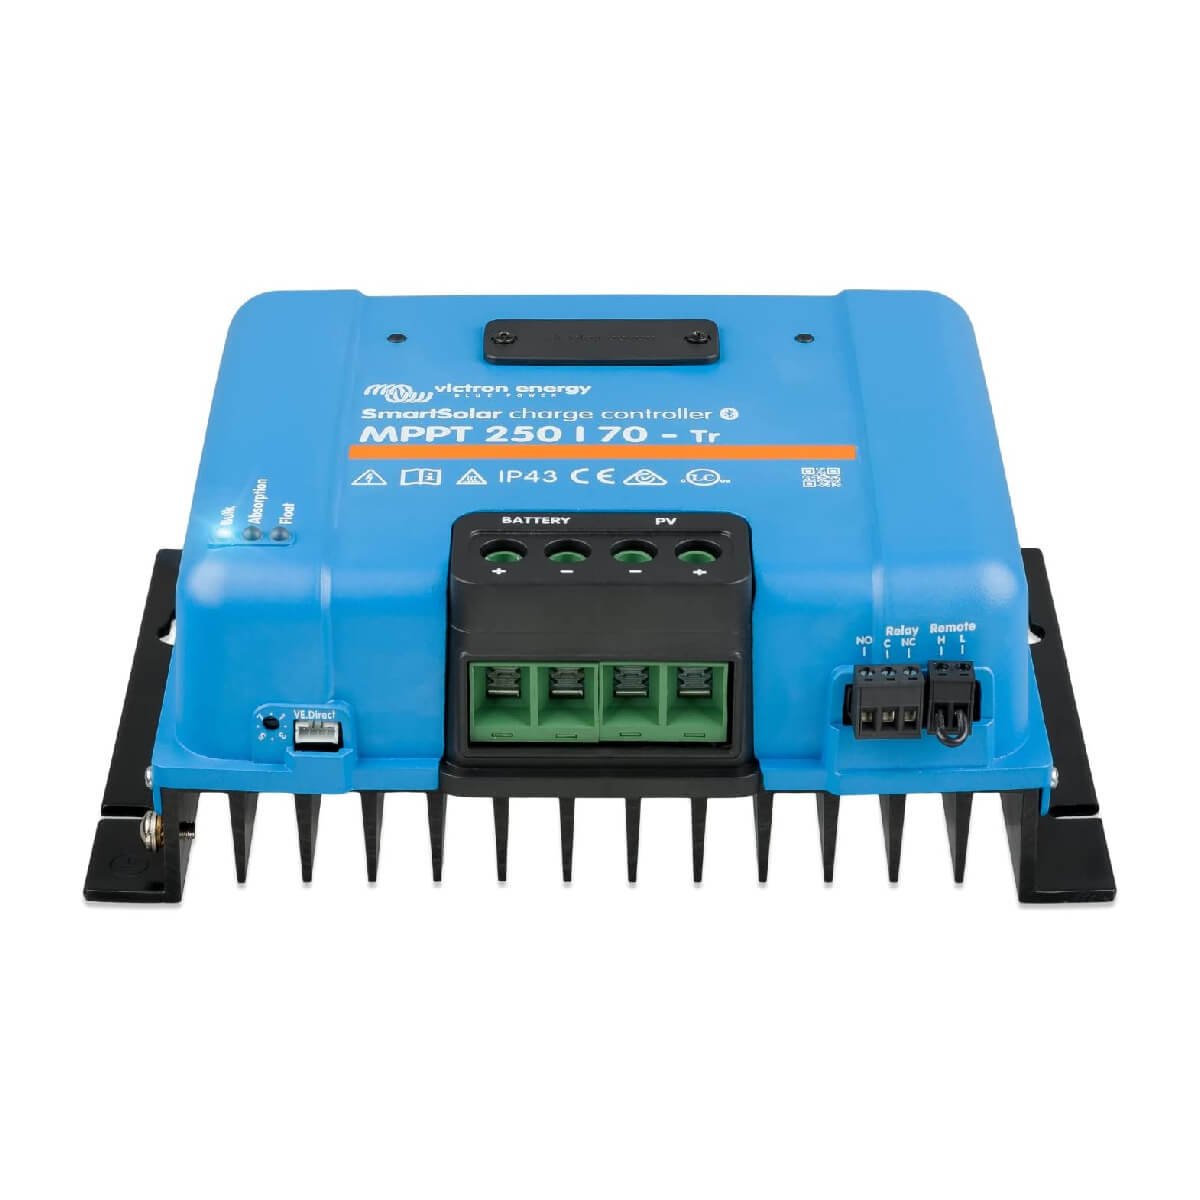 A blue Victron MPPT 250/70 - SmartSolar Charge Controller - Tr with connection ports, the Victron MPPT 250/70 by Victron Energy.